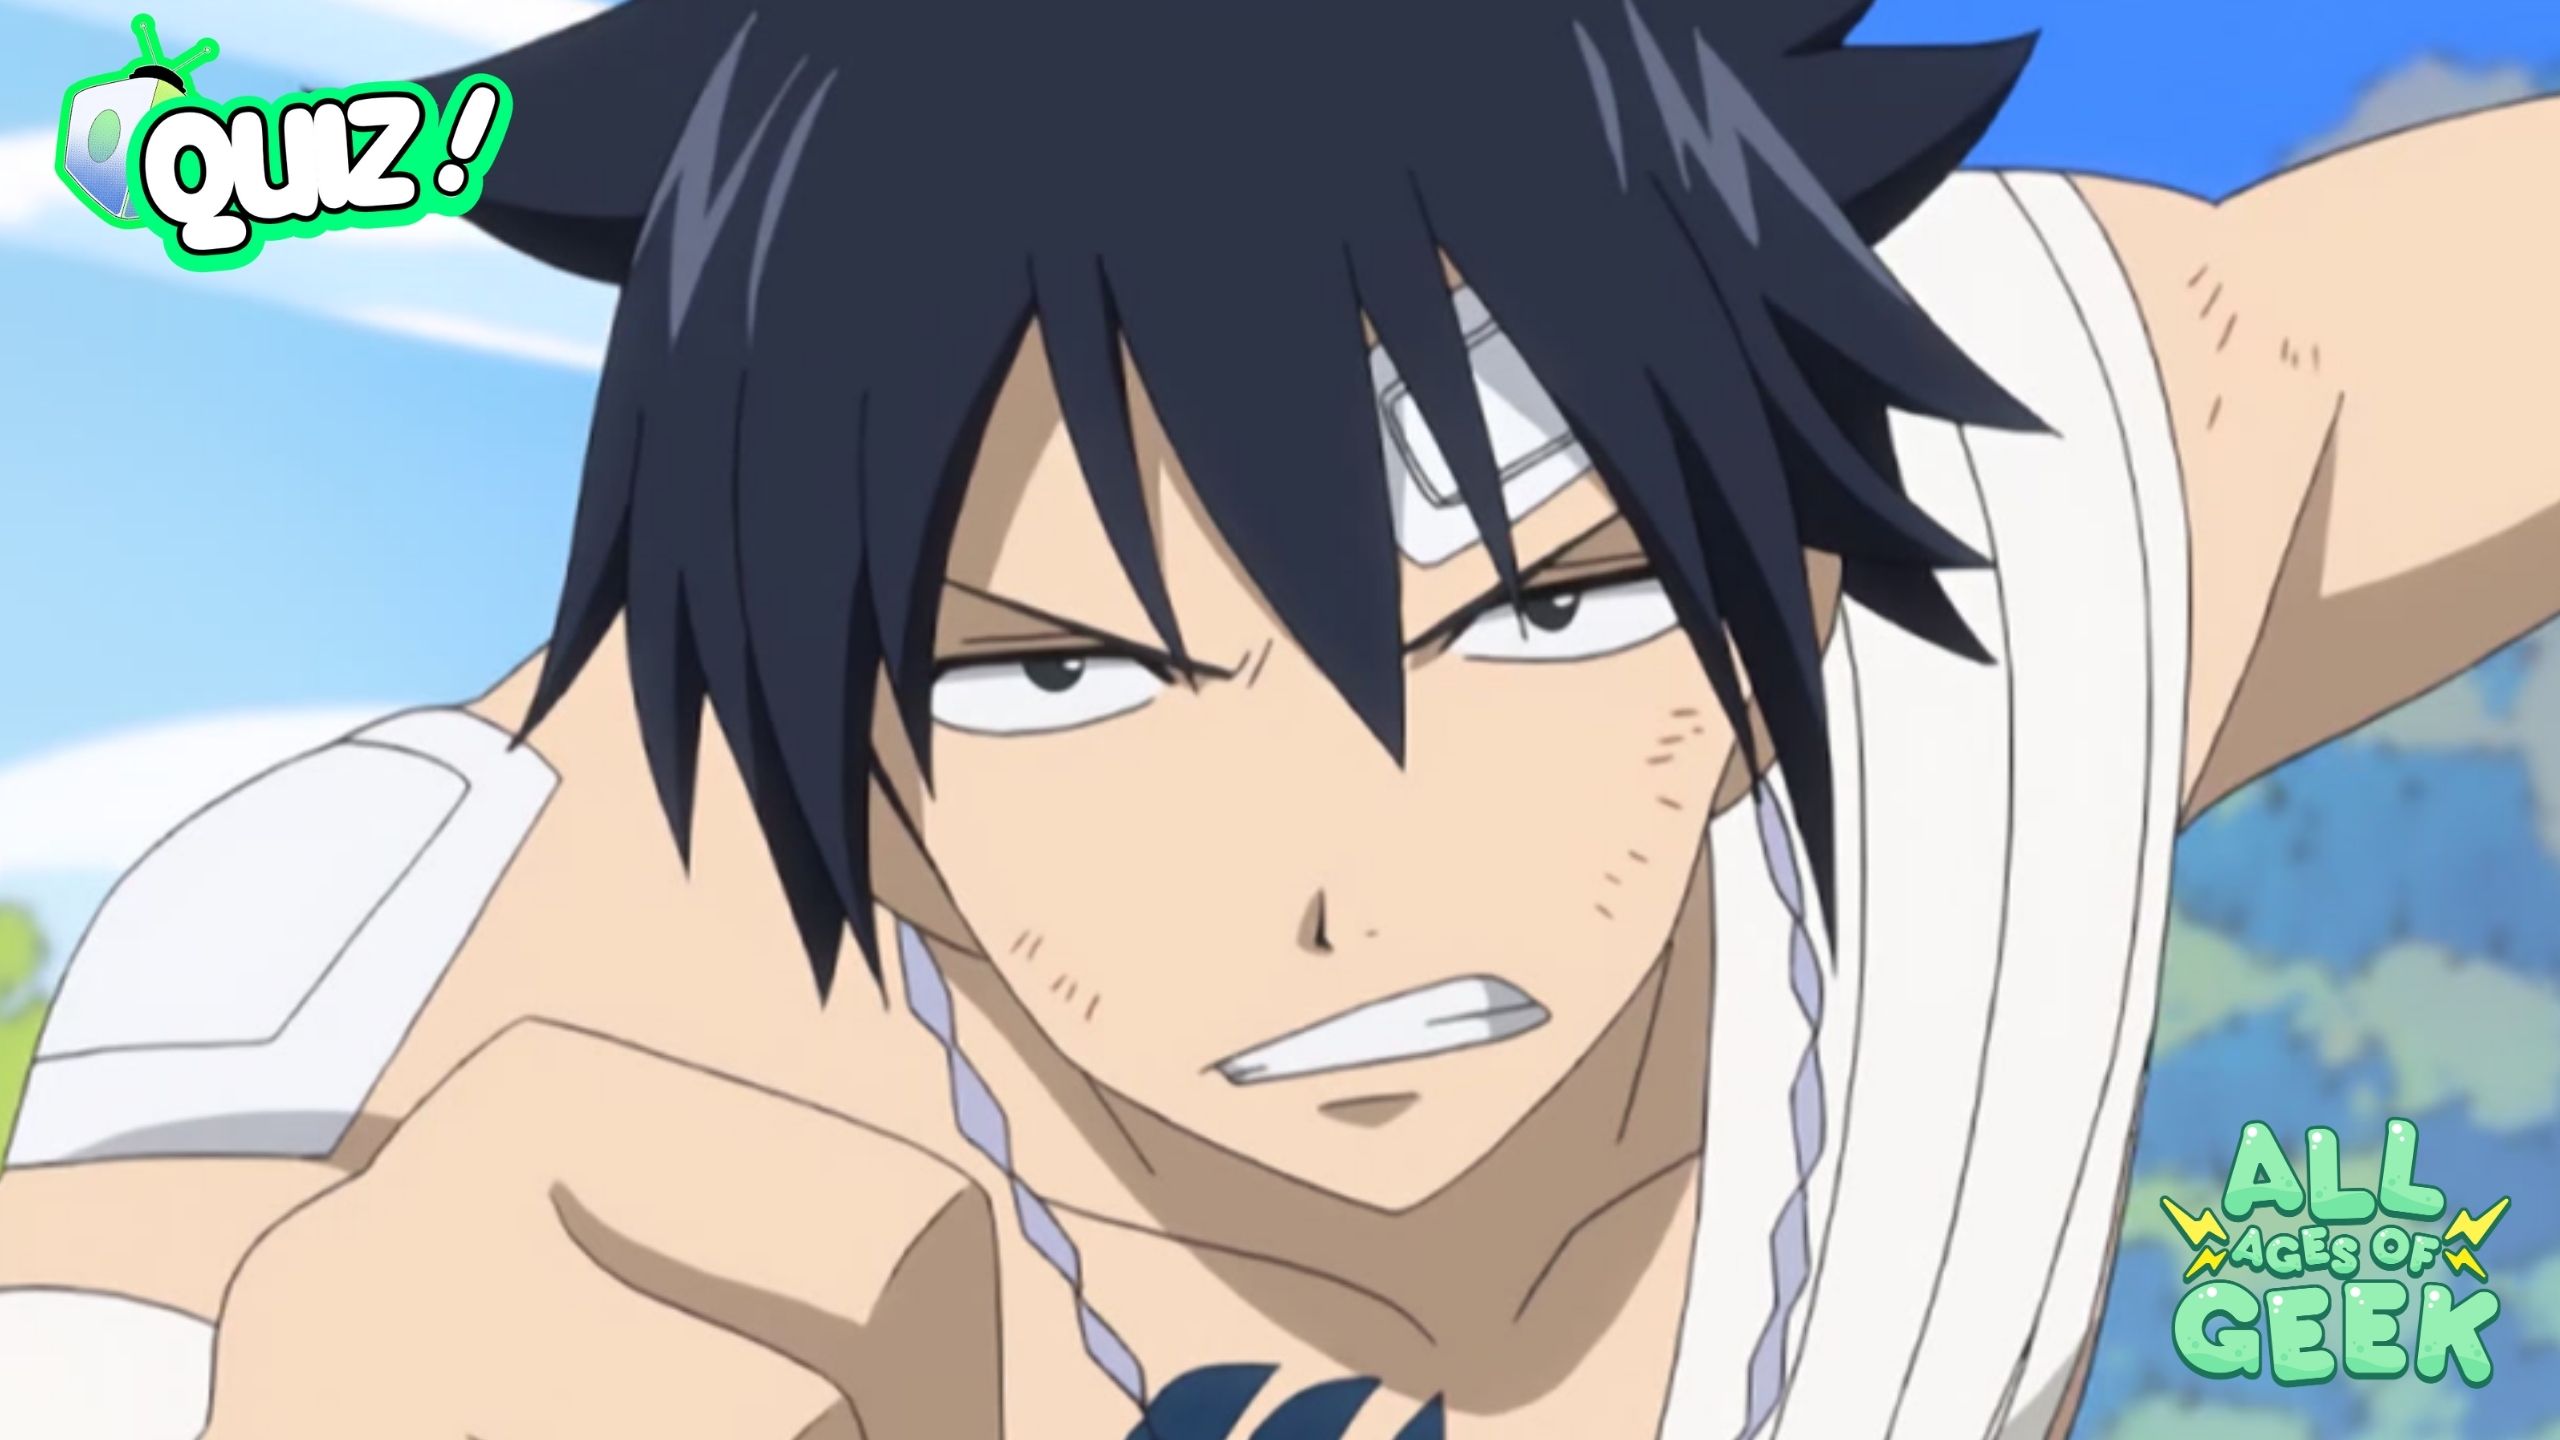 Take the How Well Do You Know Gray Fullbuster from “Fairy Tail” Quiz!